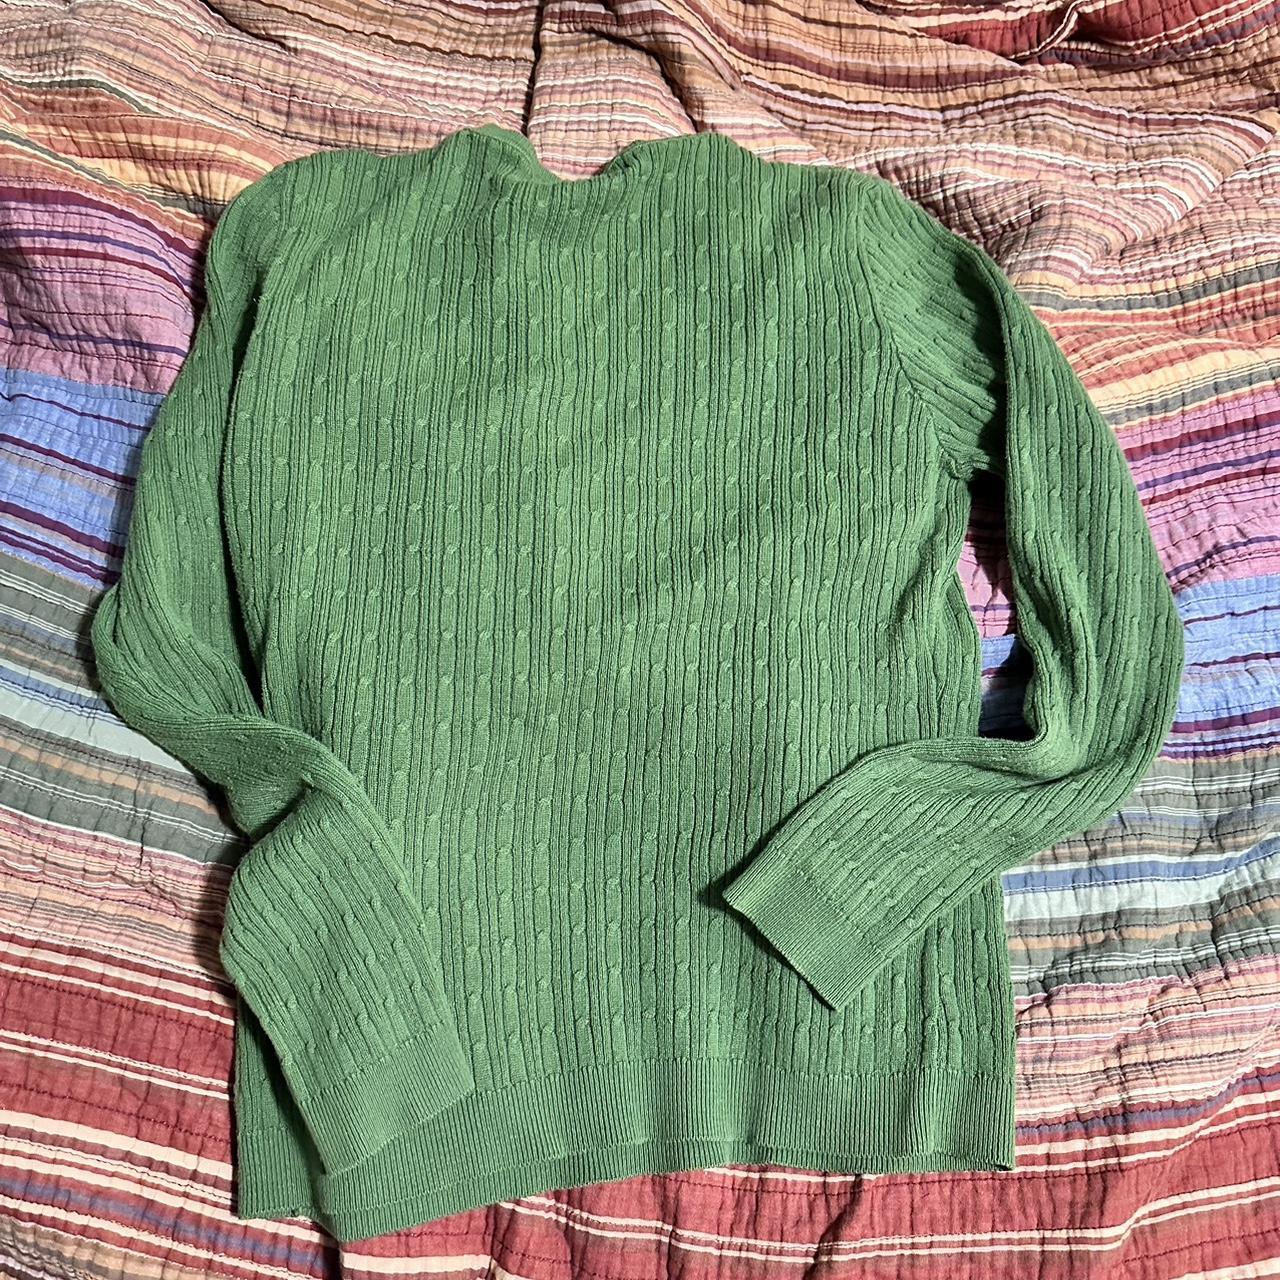 large green sweater - super comfy and stylish 3&4... - Depop